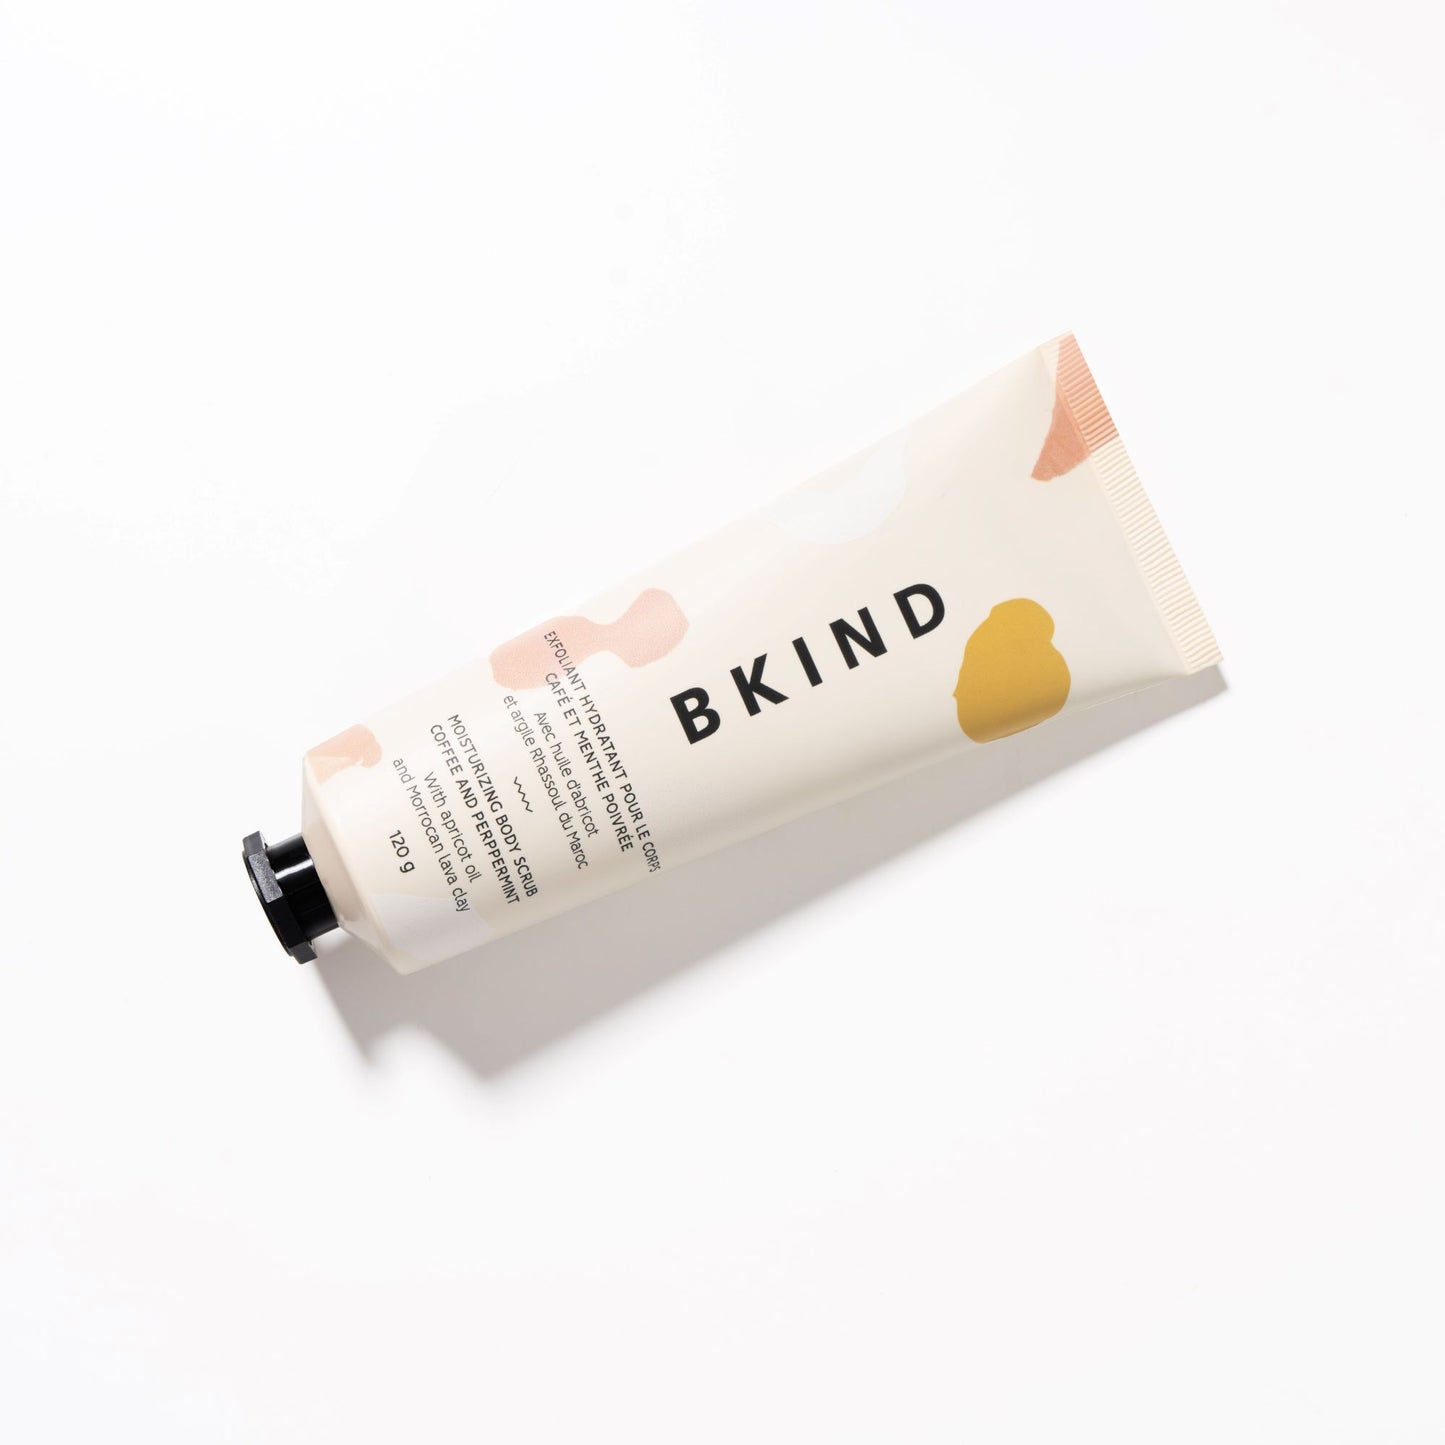 BKIND coffee and peppermint moisturizing scrub in a beige tube with peach designs on the tube displayed on a white background.